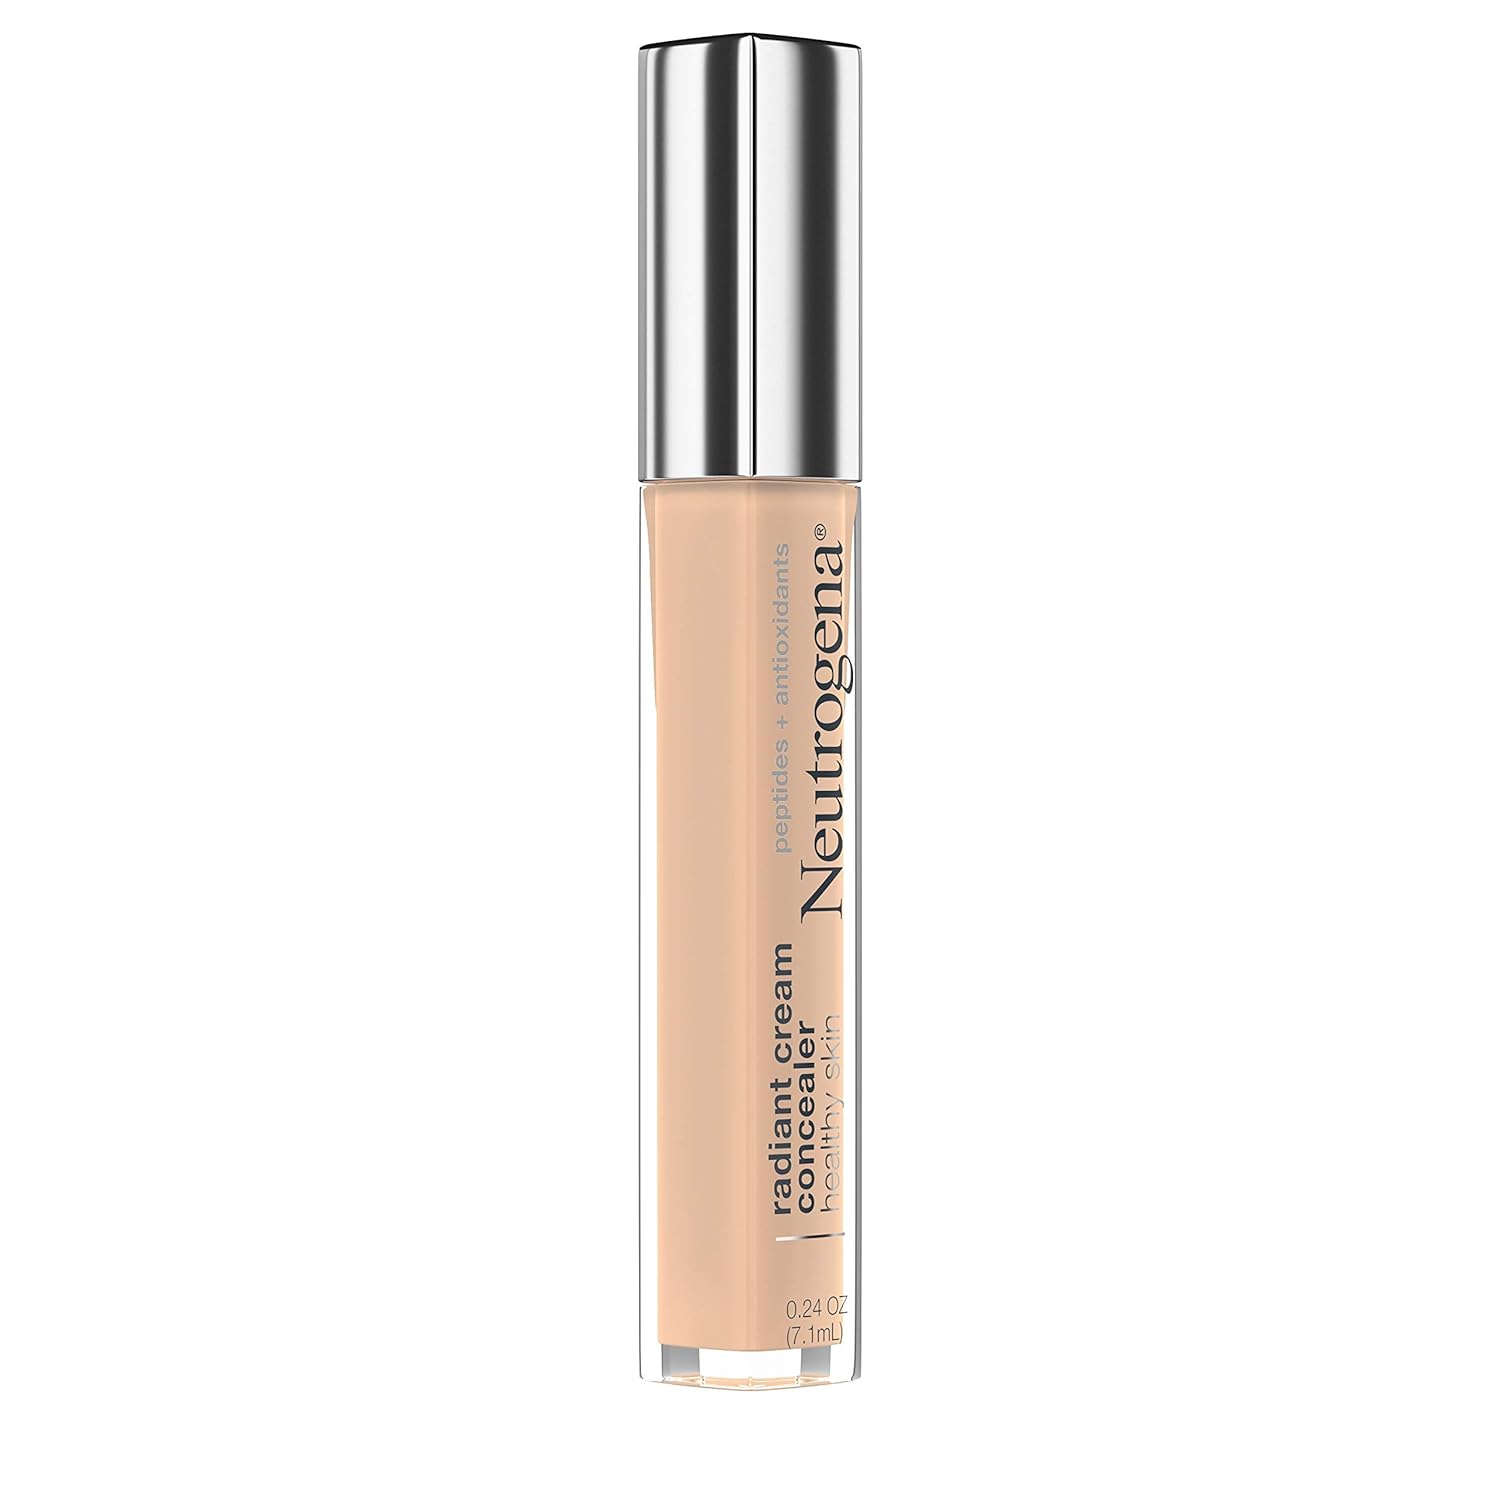  Neutrogena Healthy Skin Radiant Brightening Cream Concealer with Peptides & Vitamin E Antioxidant, Lightweight Perfecting Concealer Cream, Non-Comedogenic, Ecru Light 02 with cool